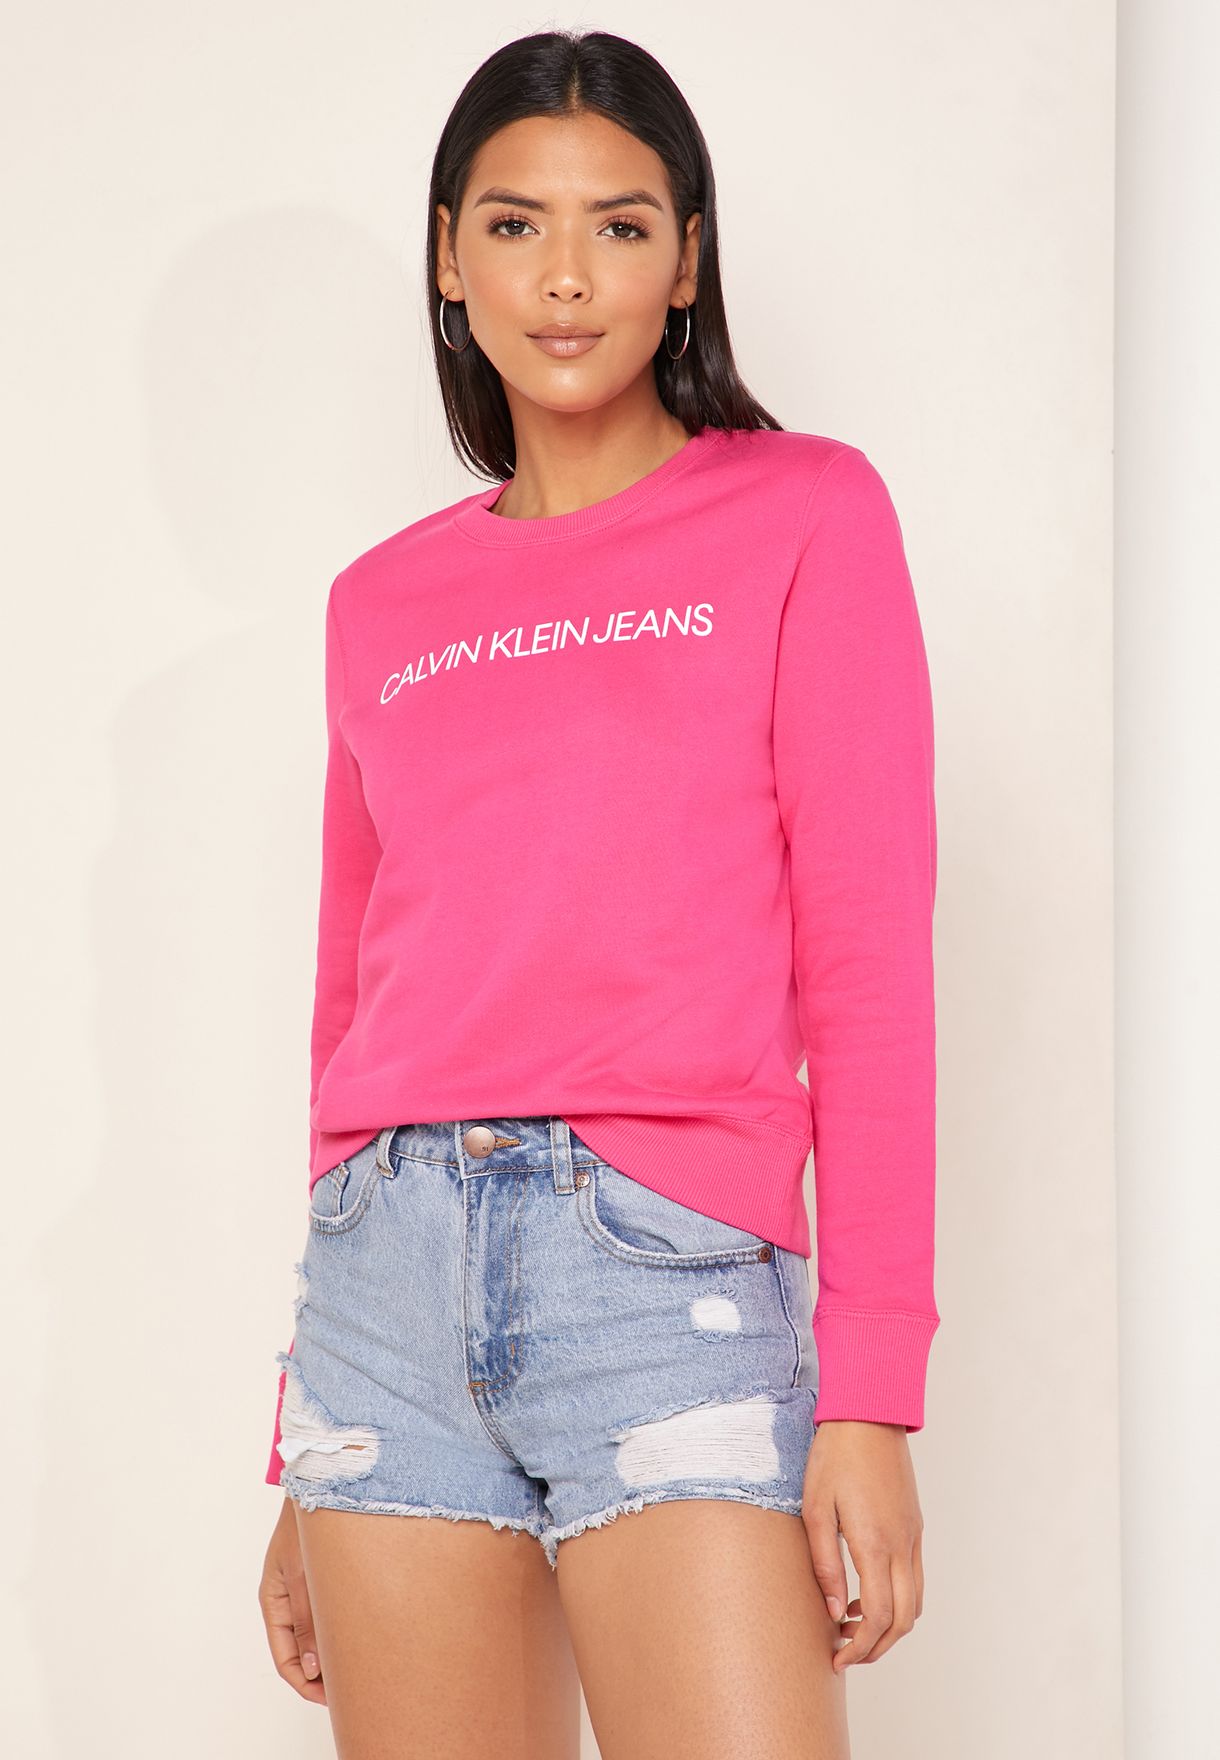 calvin klein pink Cheaper Than Retail Price> Buy Clothing, Accessories ...